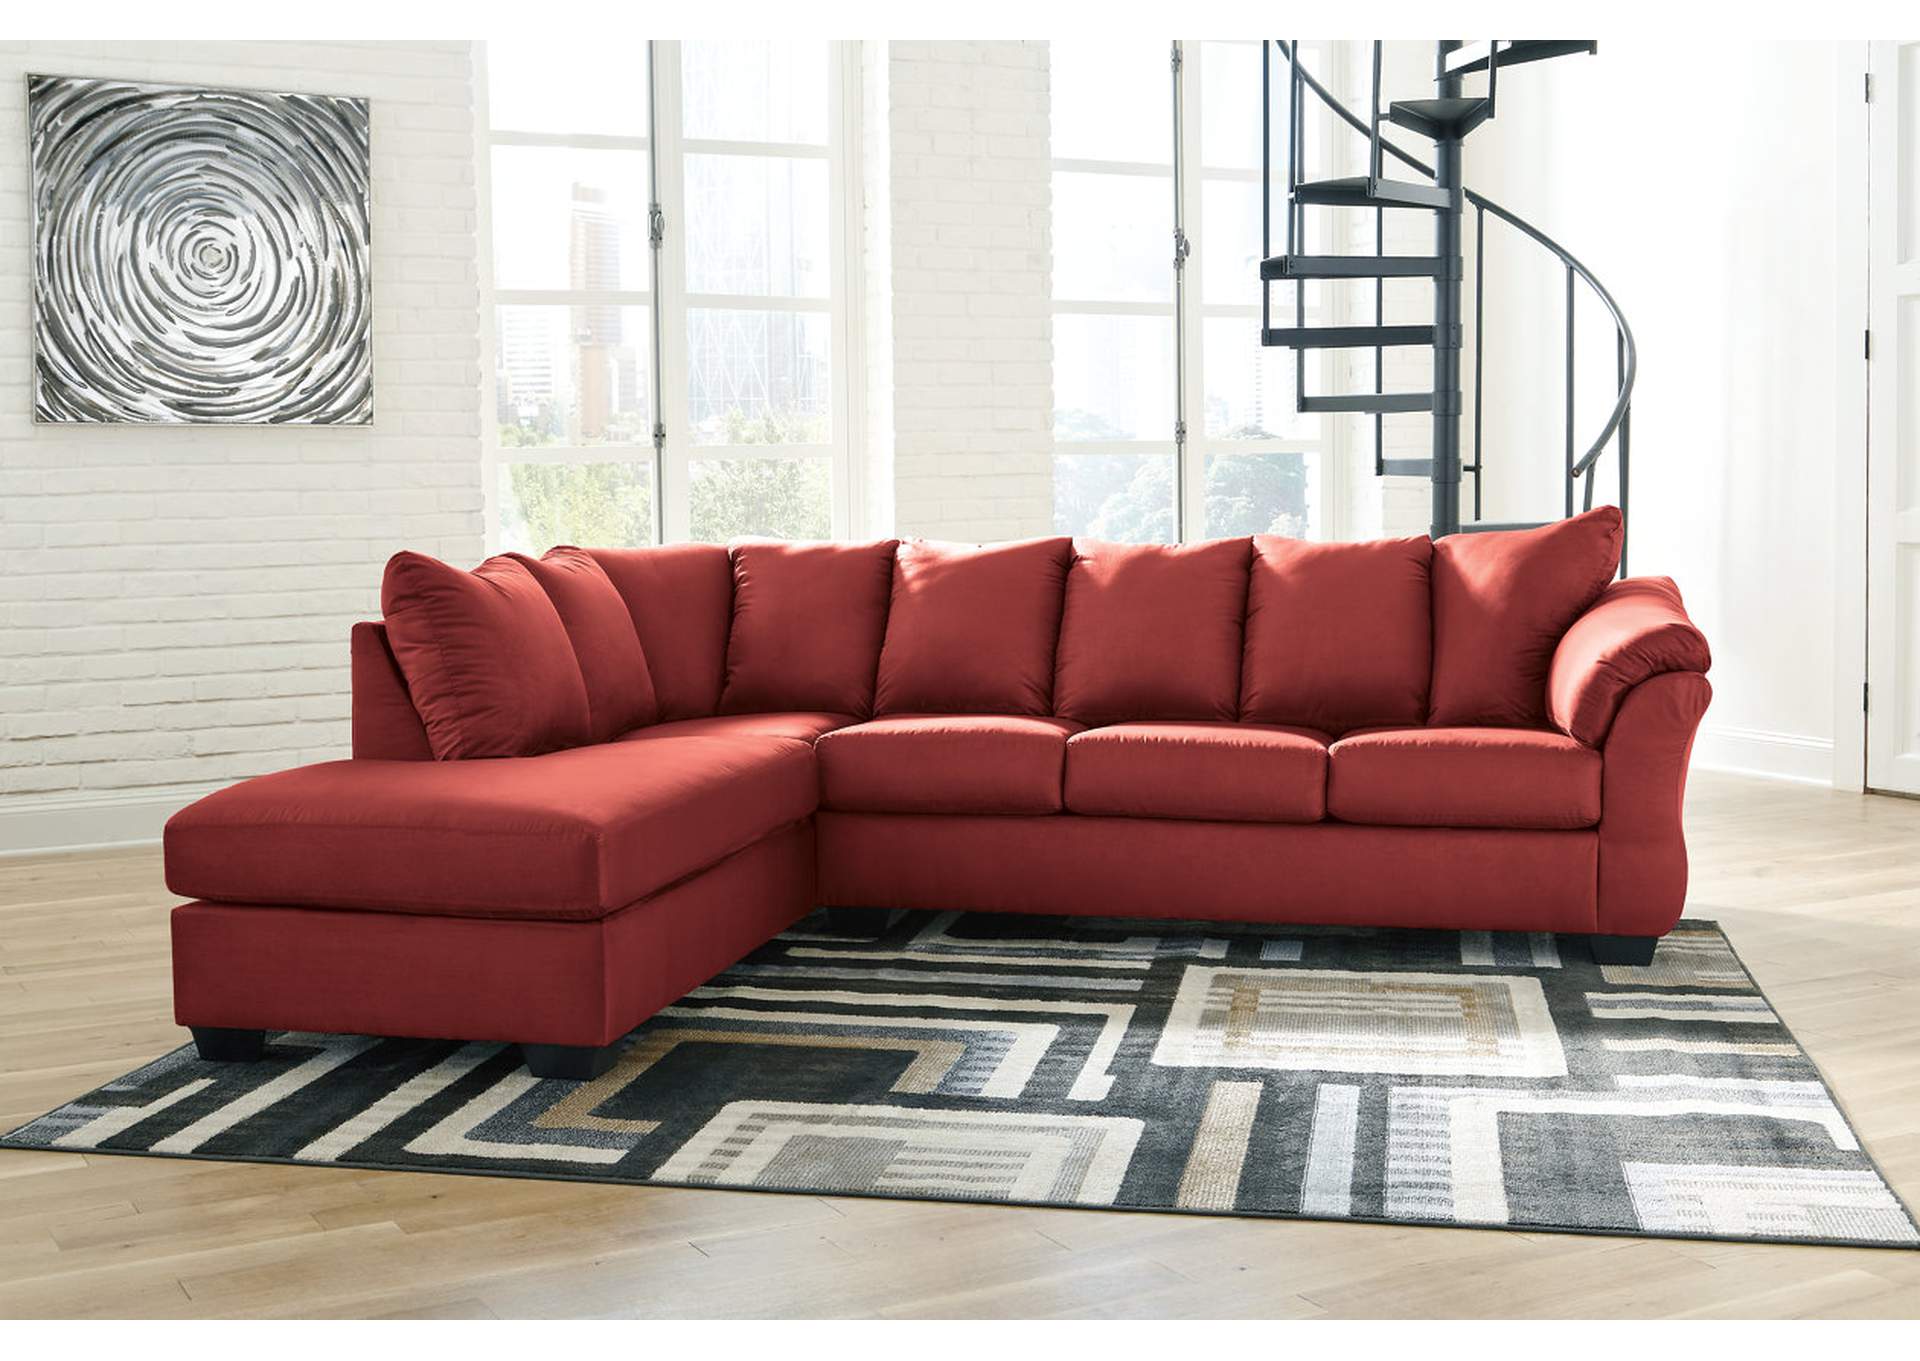 Darcy 2-Piece Sectional with Chaise,September 21 2022 eCircular